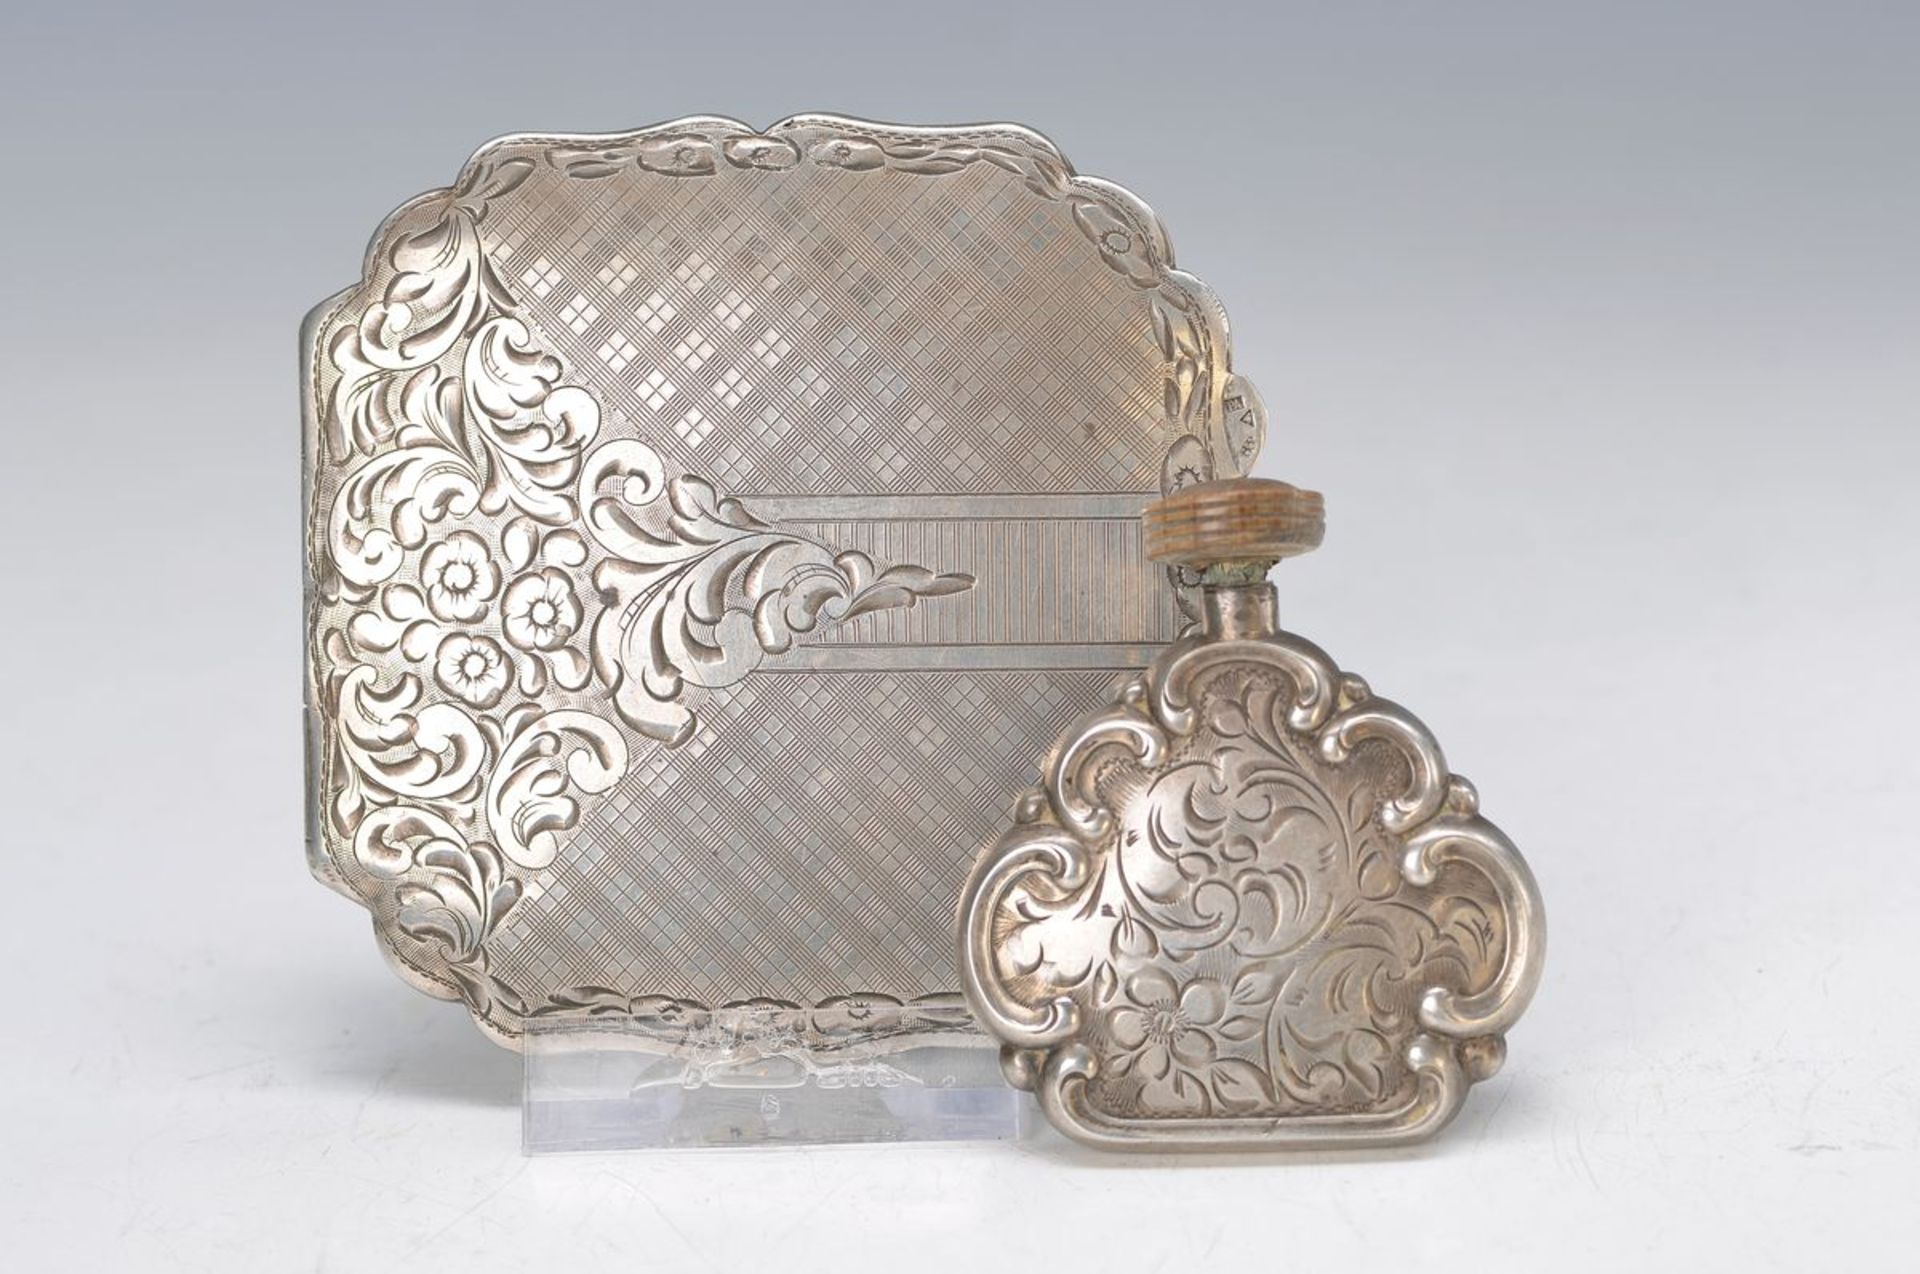 powder box and snuff bottles, around 1930, 835 silver: powder box needle etched and enchased,